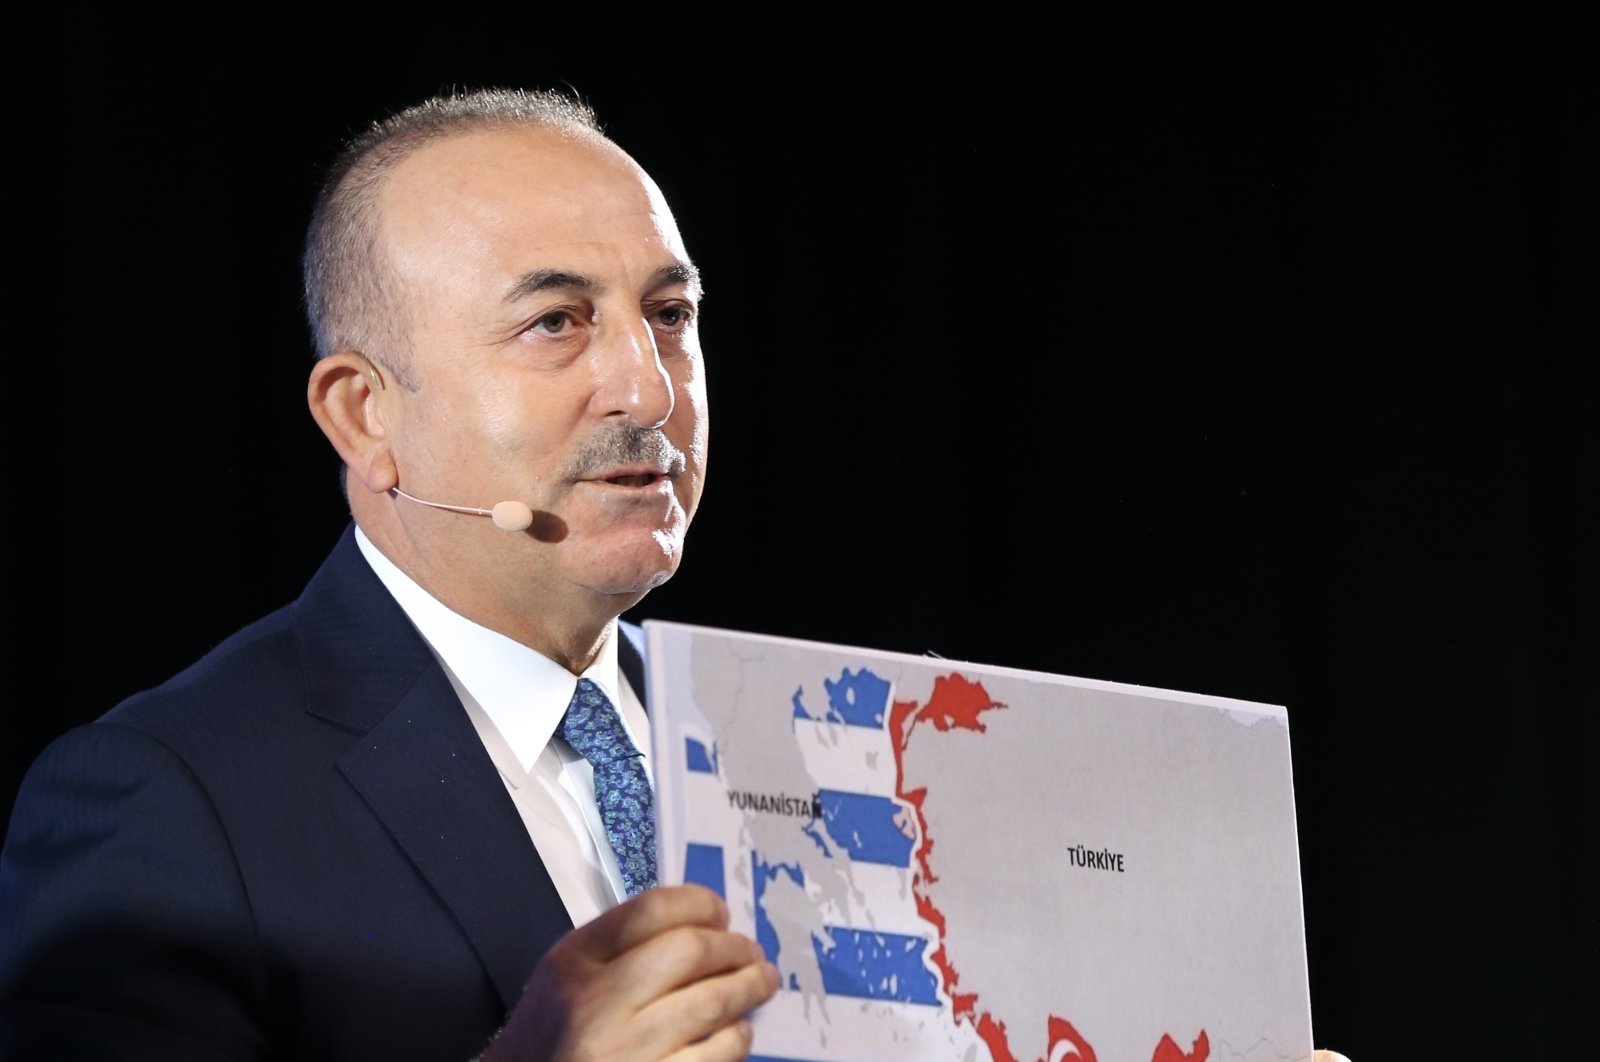 Foreign Minister Mevlüt Çavuşoğlu shows the so-called Seville Map, in which small Greek islands near the Turkish shore are seen as having huge continental shelves, while he speaks during the Bratislava Global Security Forum in Bratislava, Slovakia, Oct. 8, 2020. (AA Photo)

Foreign Minister Mevlüt Çavuşoğlu shows the so-called Seville Map, in which small Greek islands near the Turkish shore are seen as having huge continental shelves, while he speaks during the Bratislava Global Security Forum in Bratislava, Slovakia, Oct. 8, 2020. (AA Photo)